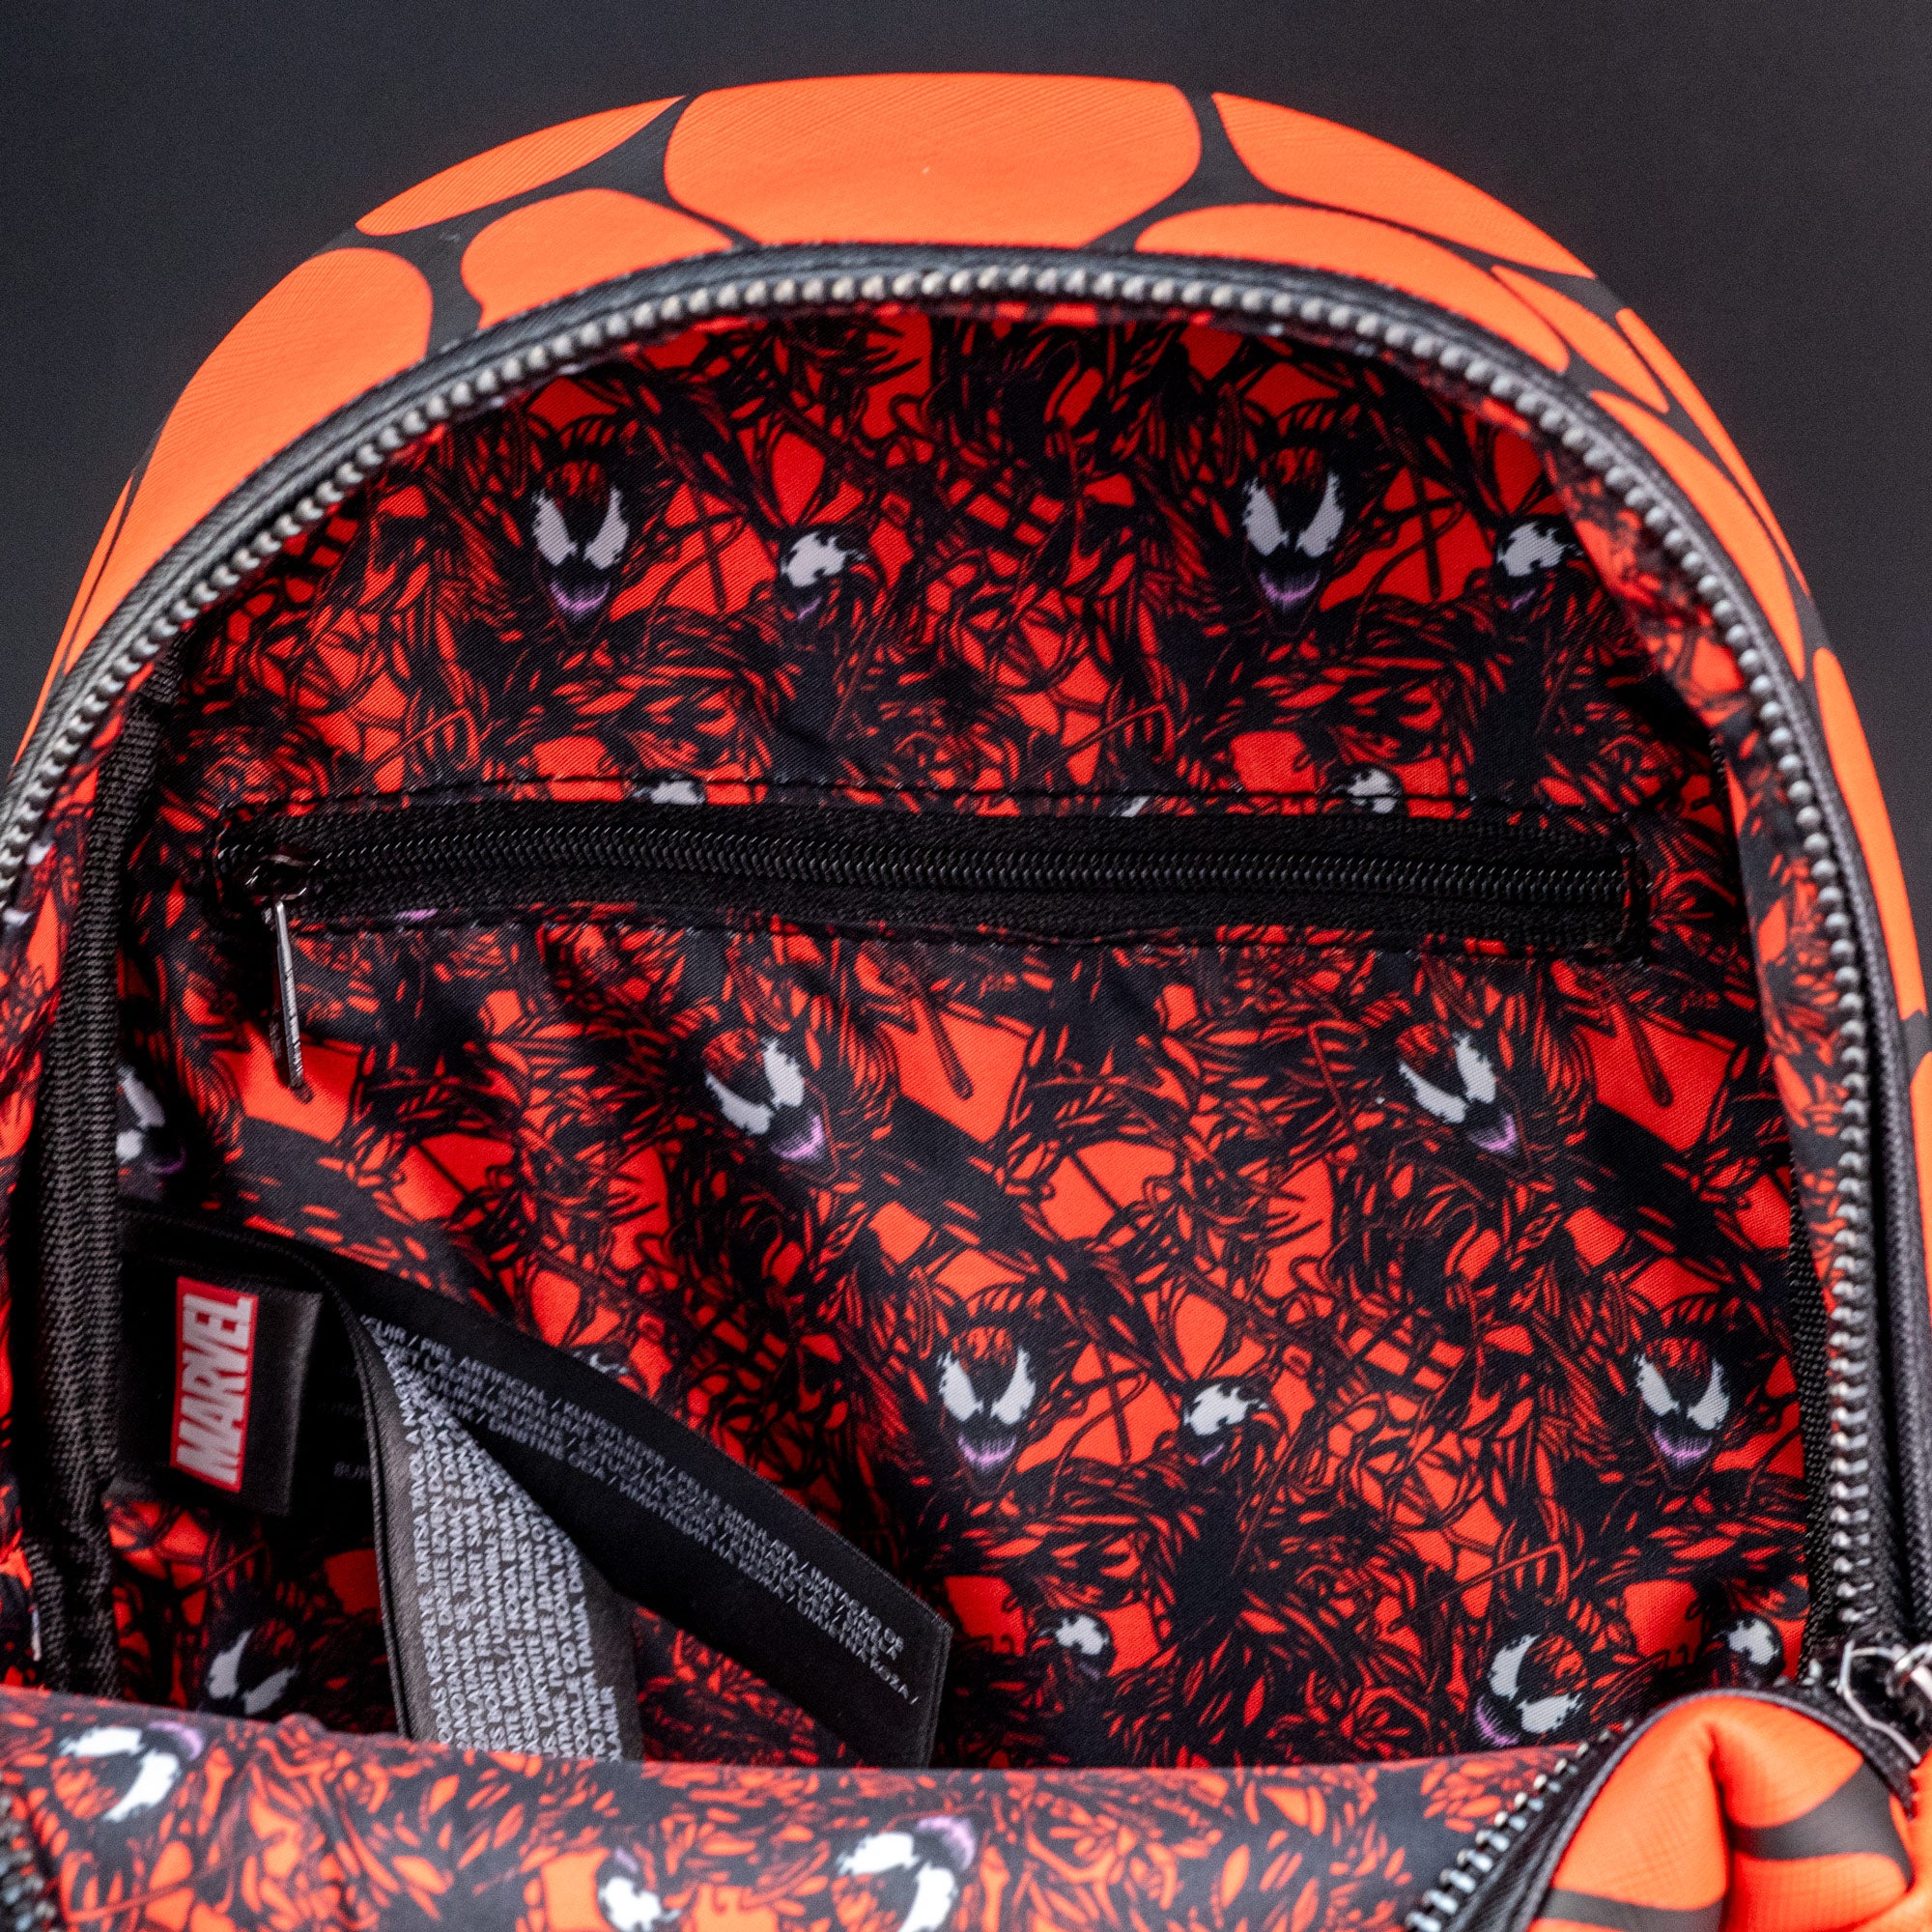 Loungefly x Marvel Carnage Cosplay Mini Backpack